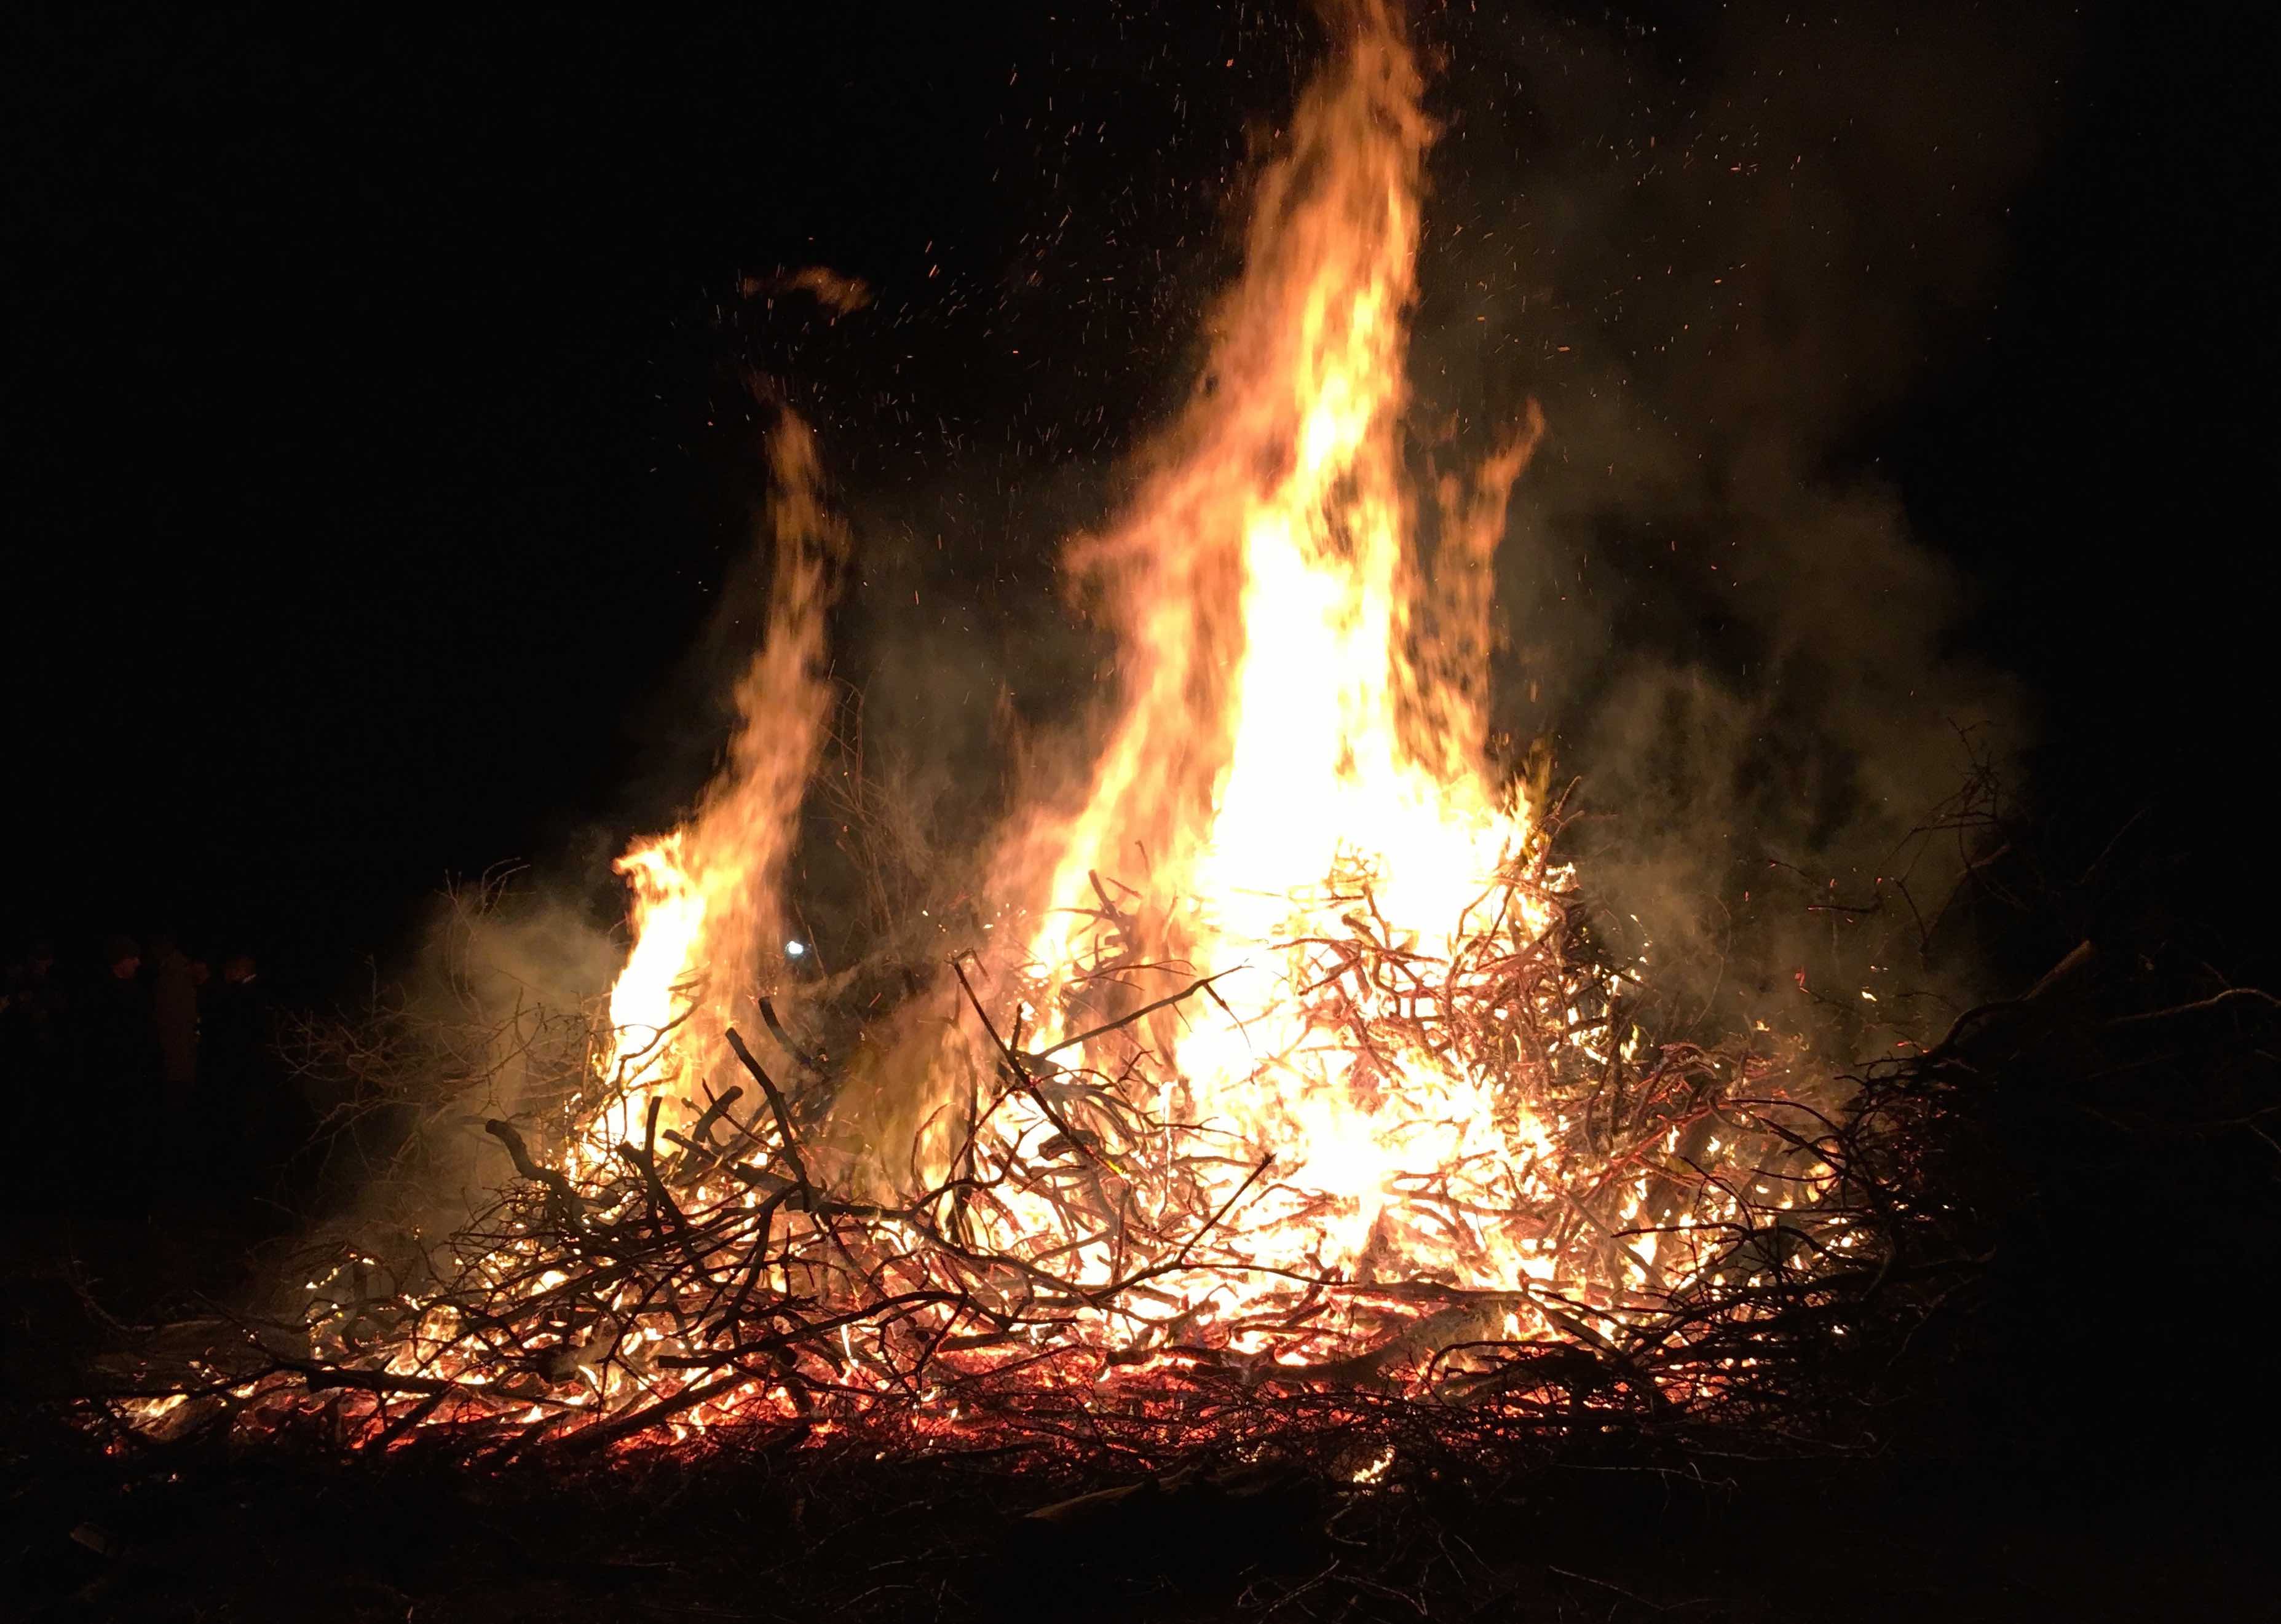 2018 Osterfeuer